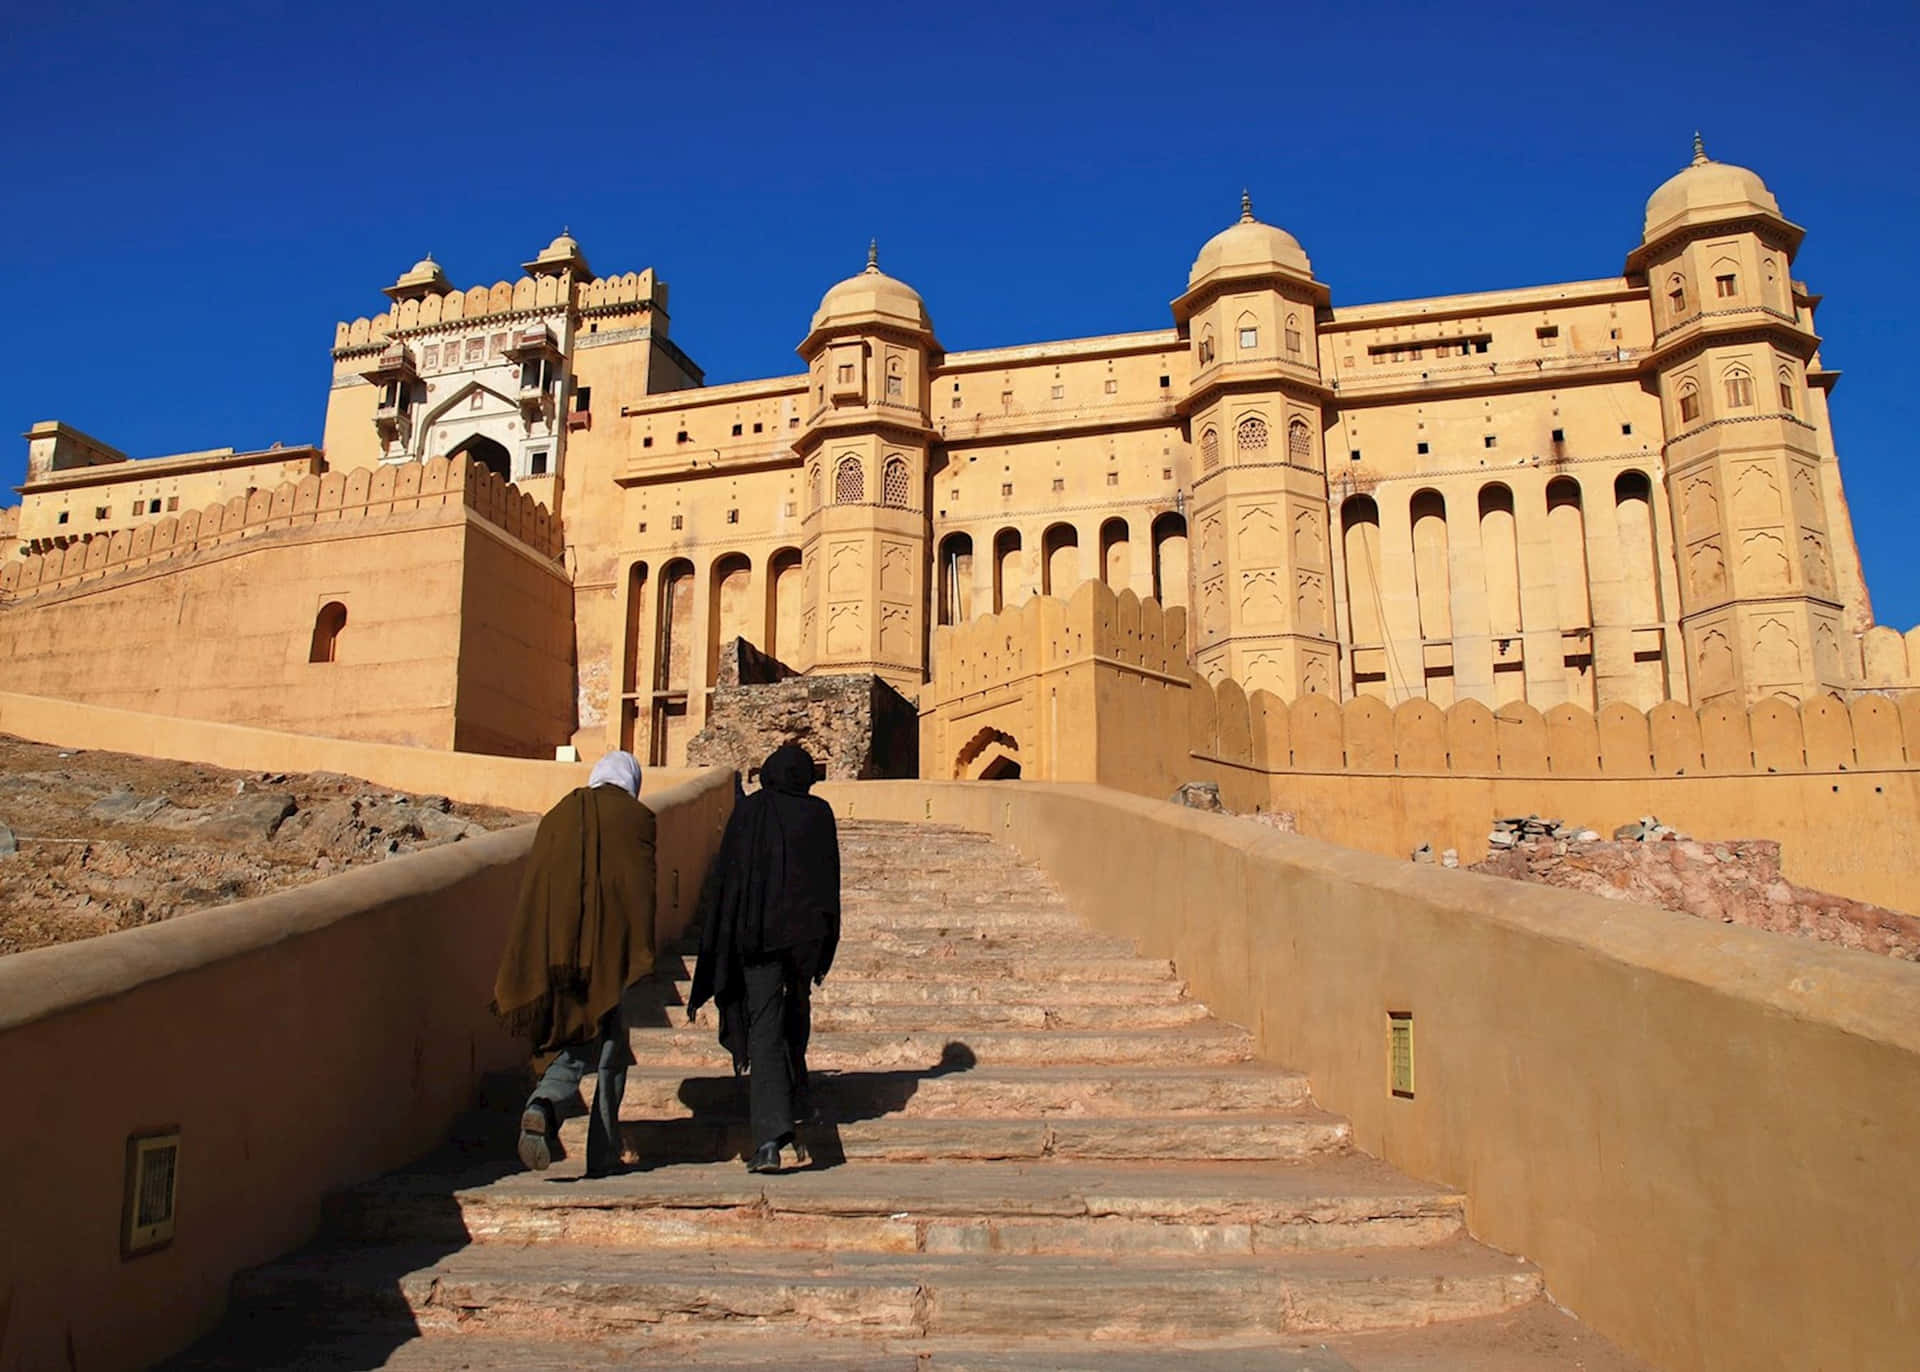 View Of The Amer Fort Wallpaper